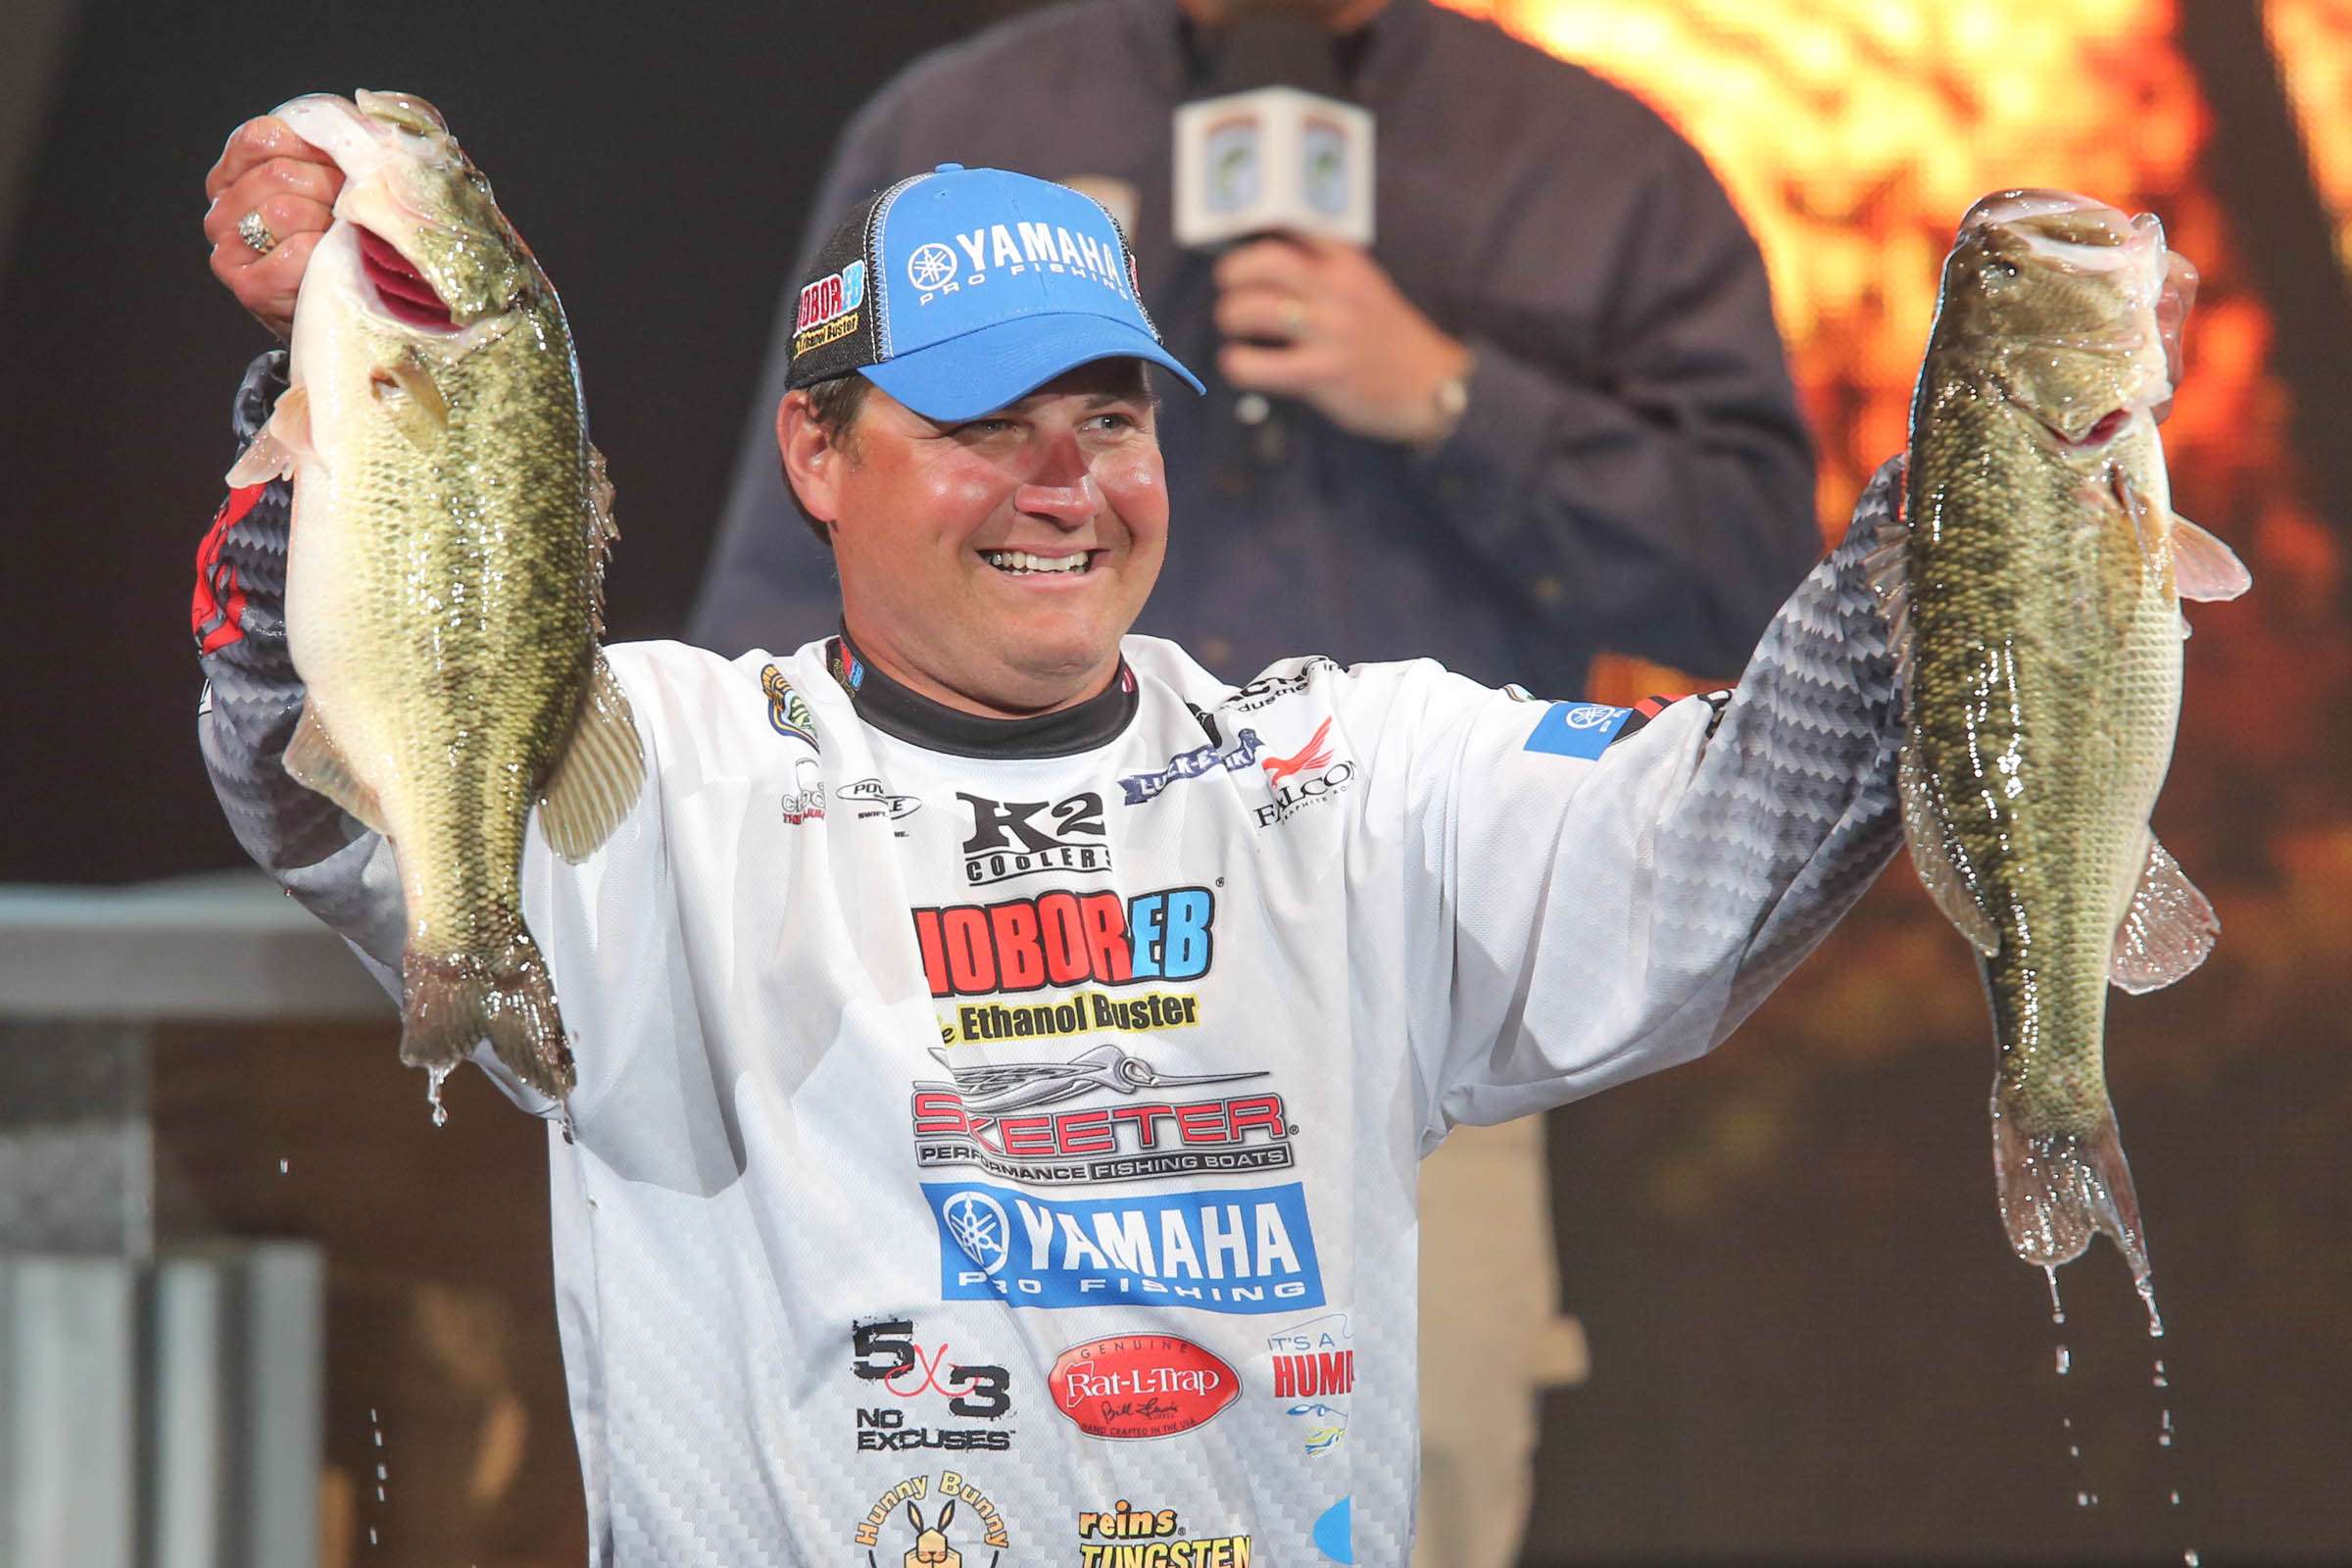 <b>What has been your greatest accomplishment in the fishing?</b><br><br>

Two things. 1. Qualifying for three Classics. Thatâs a big deal by itself because it is the Super Bowl of fishingâI know that term gets thrown around a lot, but it really is. Just being there to fish at that event is â¦ well, hard to describe â¦ Iâd say itâs a dream come true for sure. <br>
Second, making it to the Elite Series is one thing, but sticking around is another thing. Being able to continue to compete on this level is a big accomplishment for me! Iâm never satisfied, though, but I am thankful.